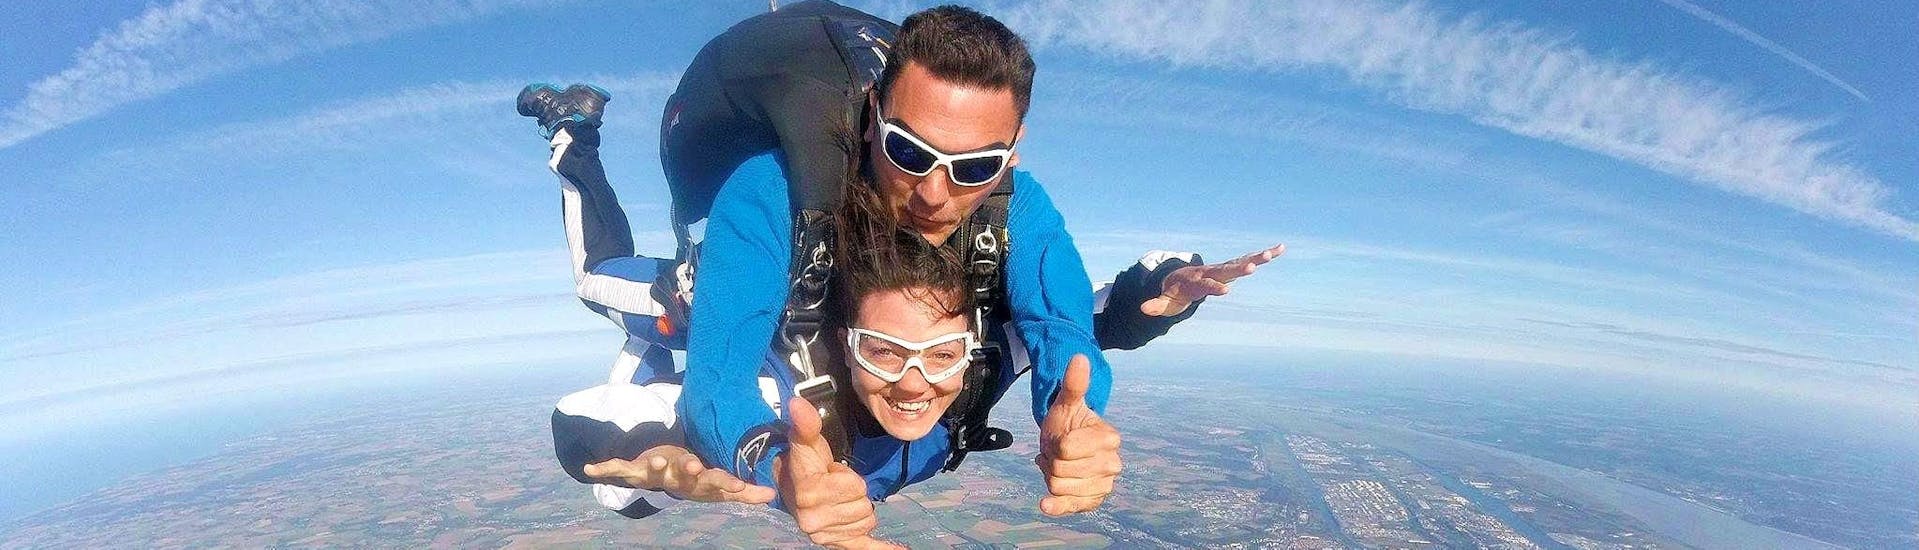 A woman is experiencing freefall with her Paris-Blois Parachutisme tandem skydiving instructor during her Tandem Skydive from 3000m in Blois - South of Paris.